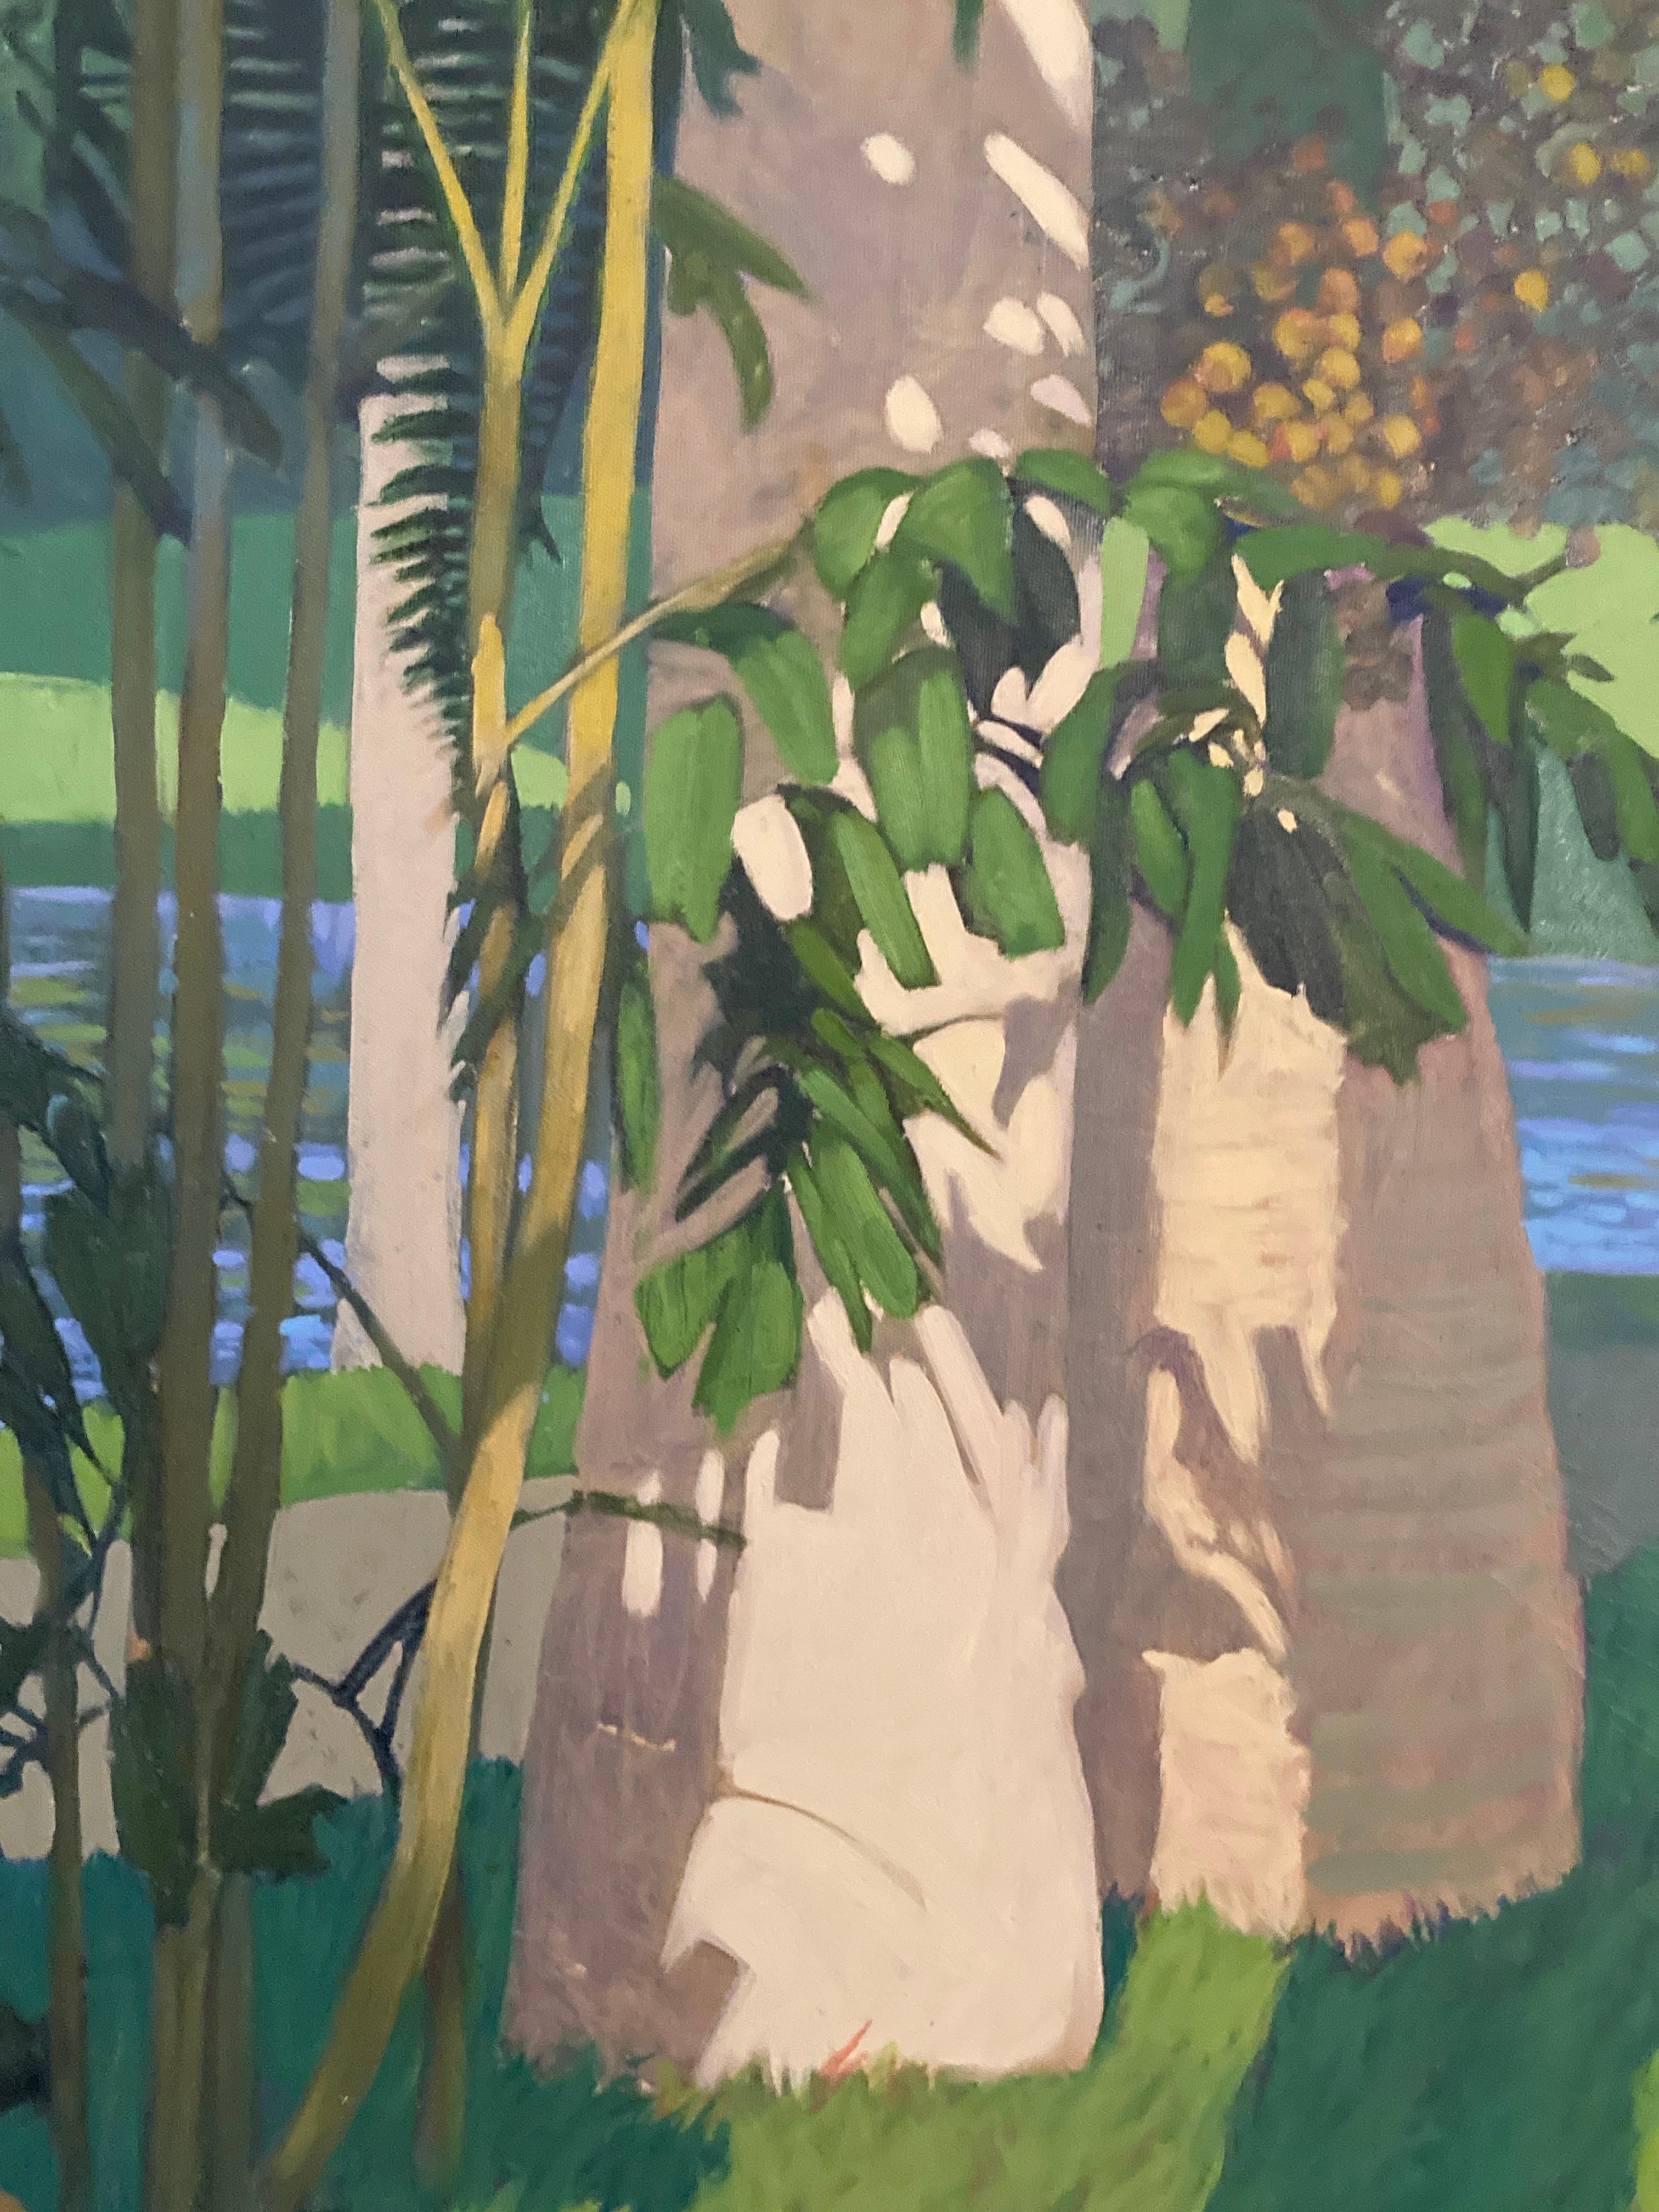 Hand-Painted Bottle Palms, Oasis, Oil on Canvas, Richard 'Dick' Obenchain, 1979